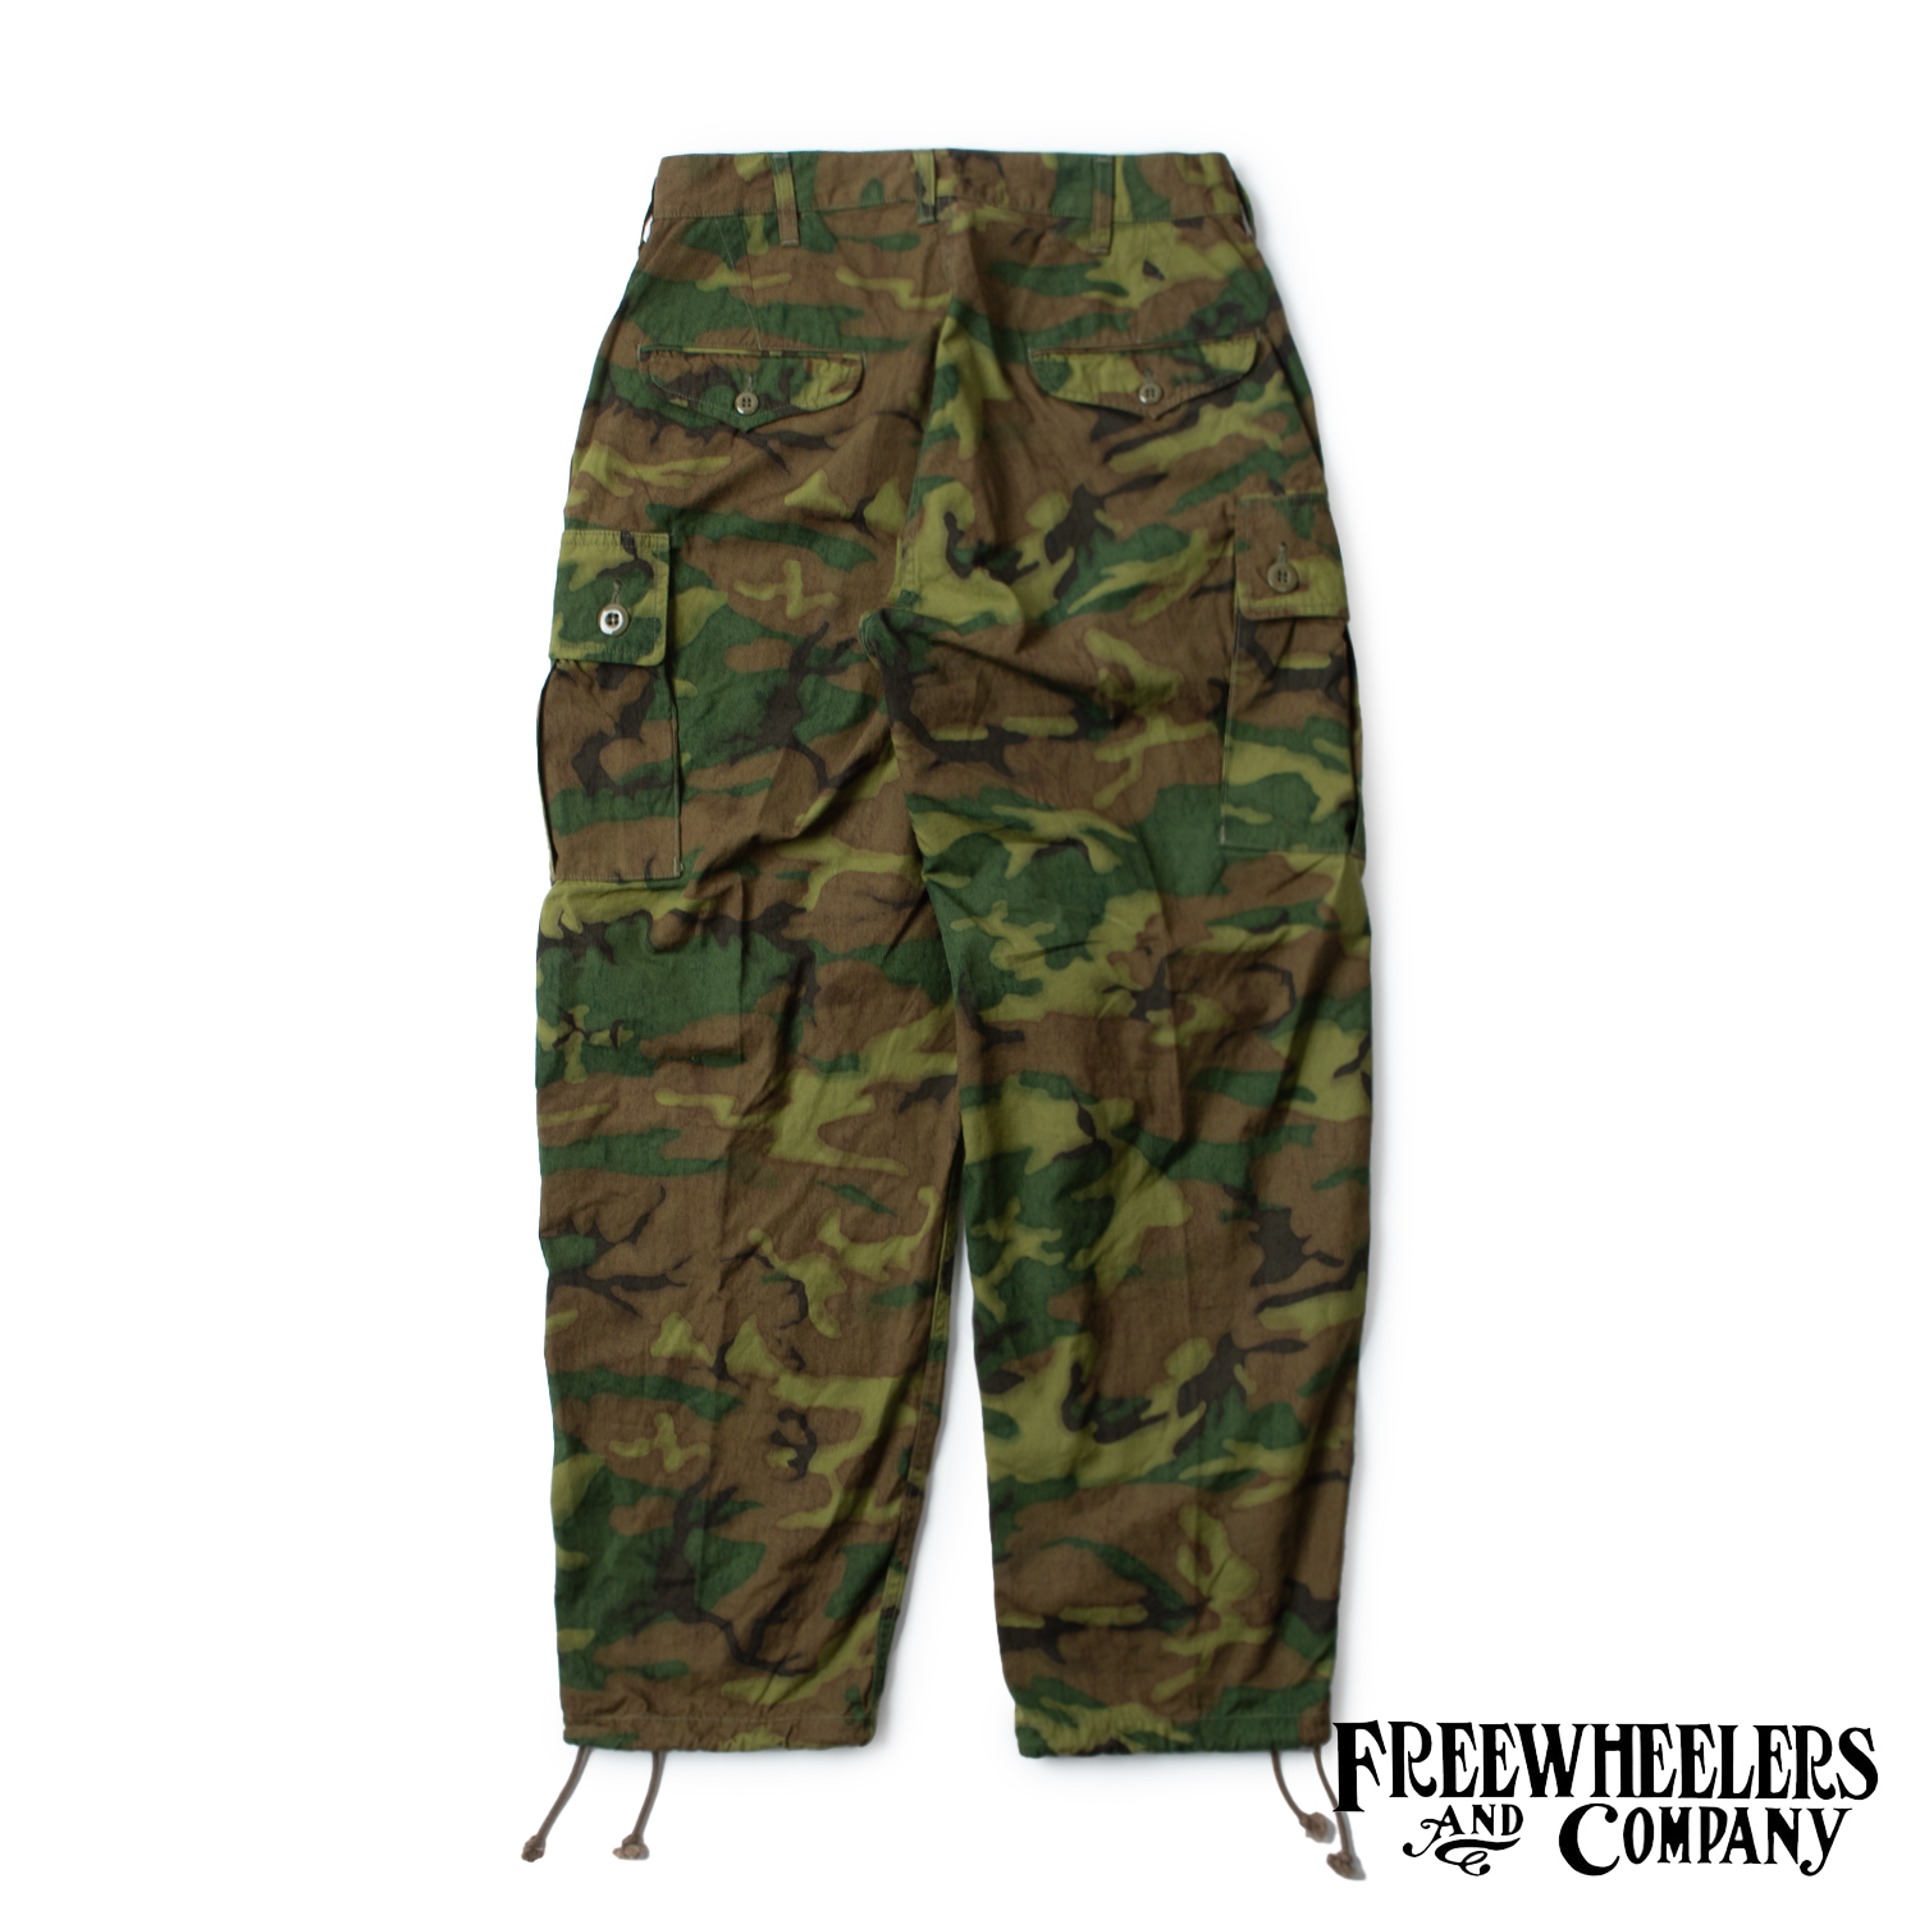  [UNION SPECIAL OVERALLS]   Military Tropical Trousers  “JUNGLE FATIGUES” (ERDL CAMO)